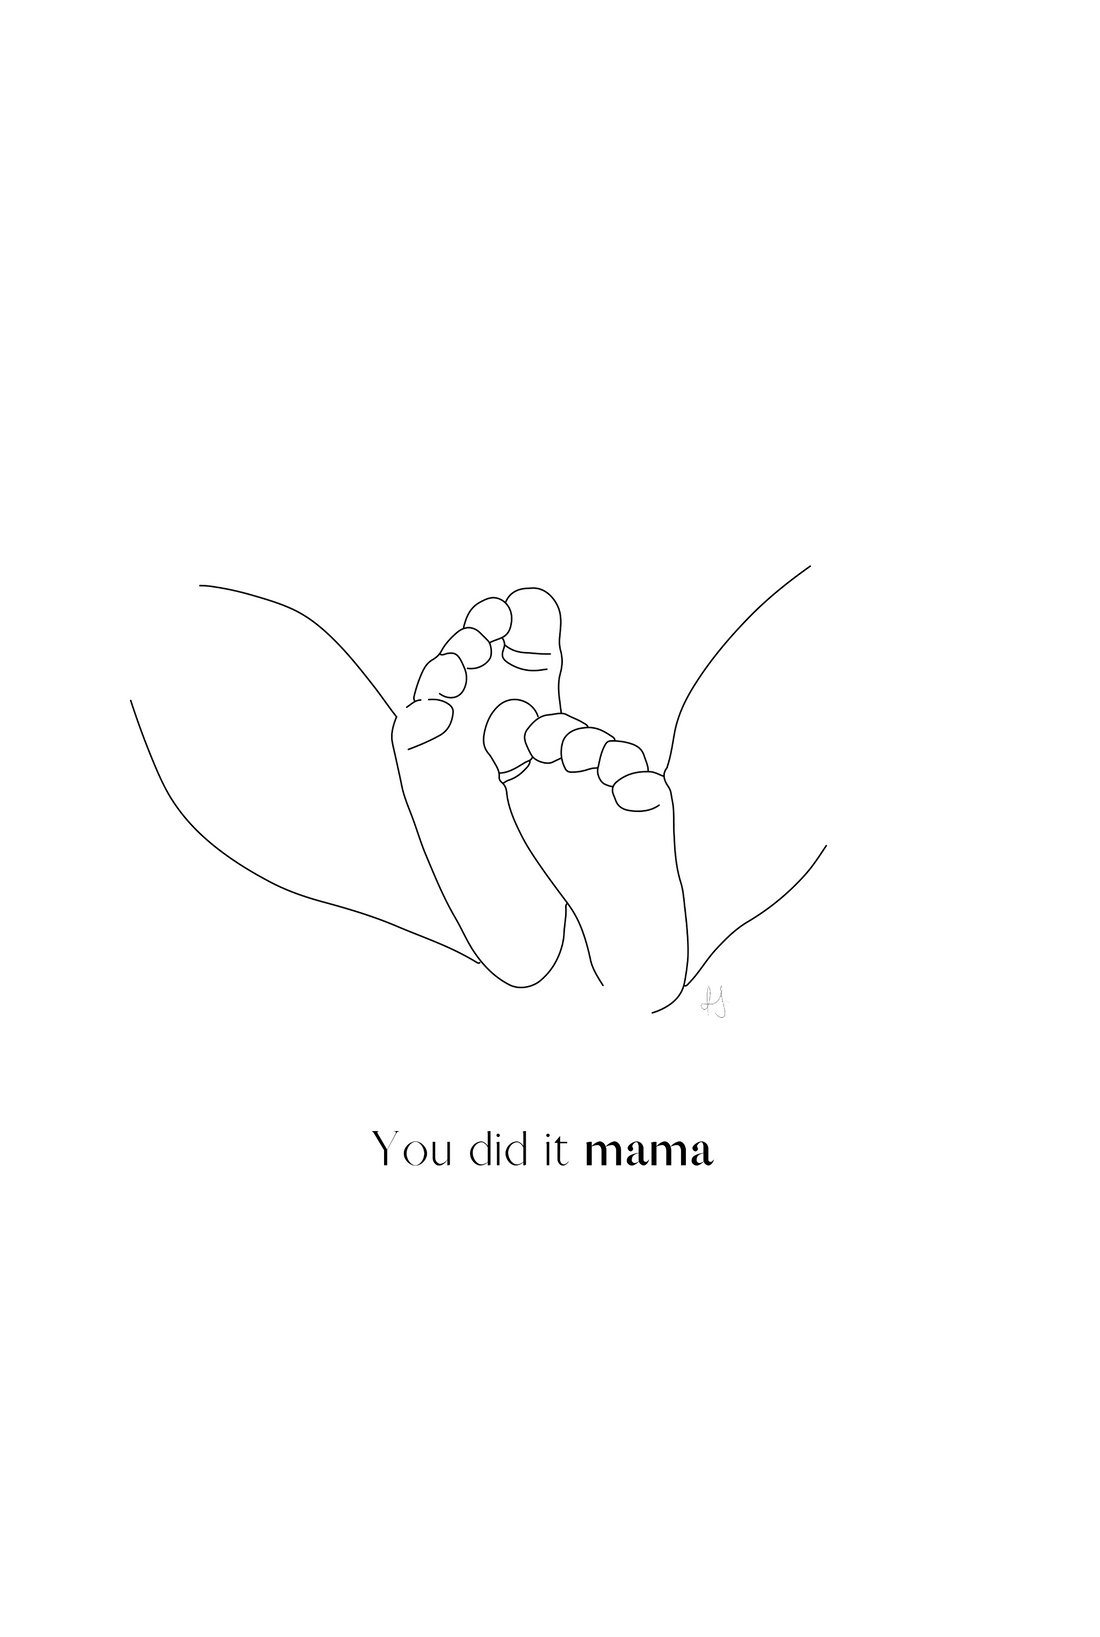 You did it mama - card (A6)